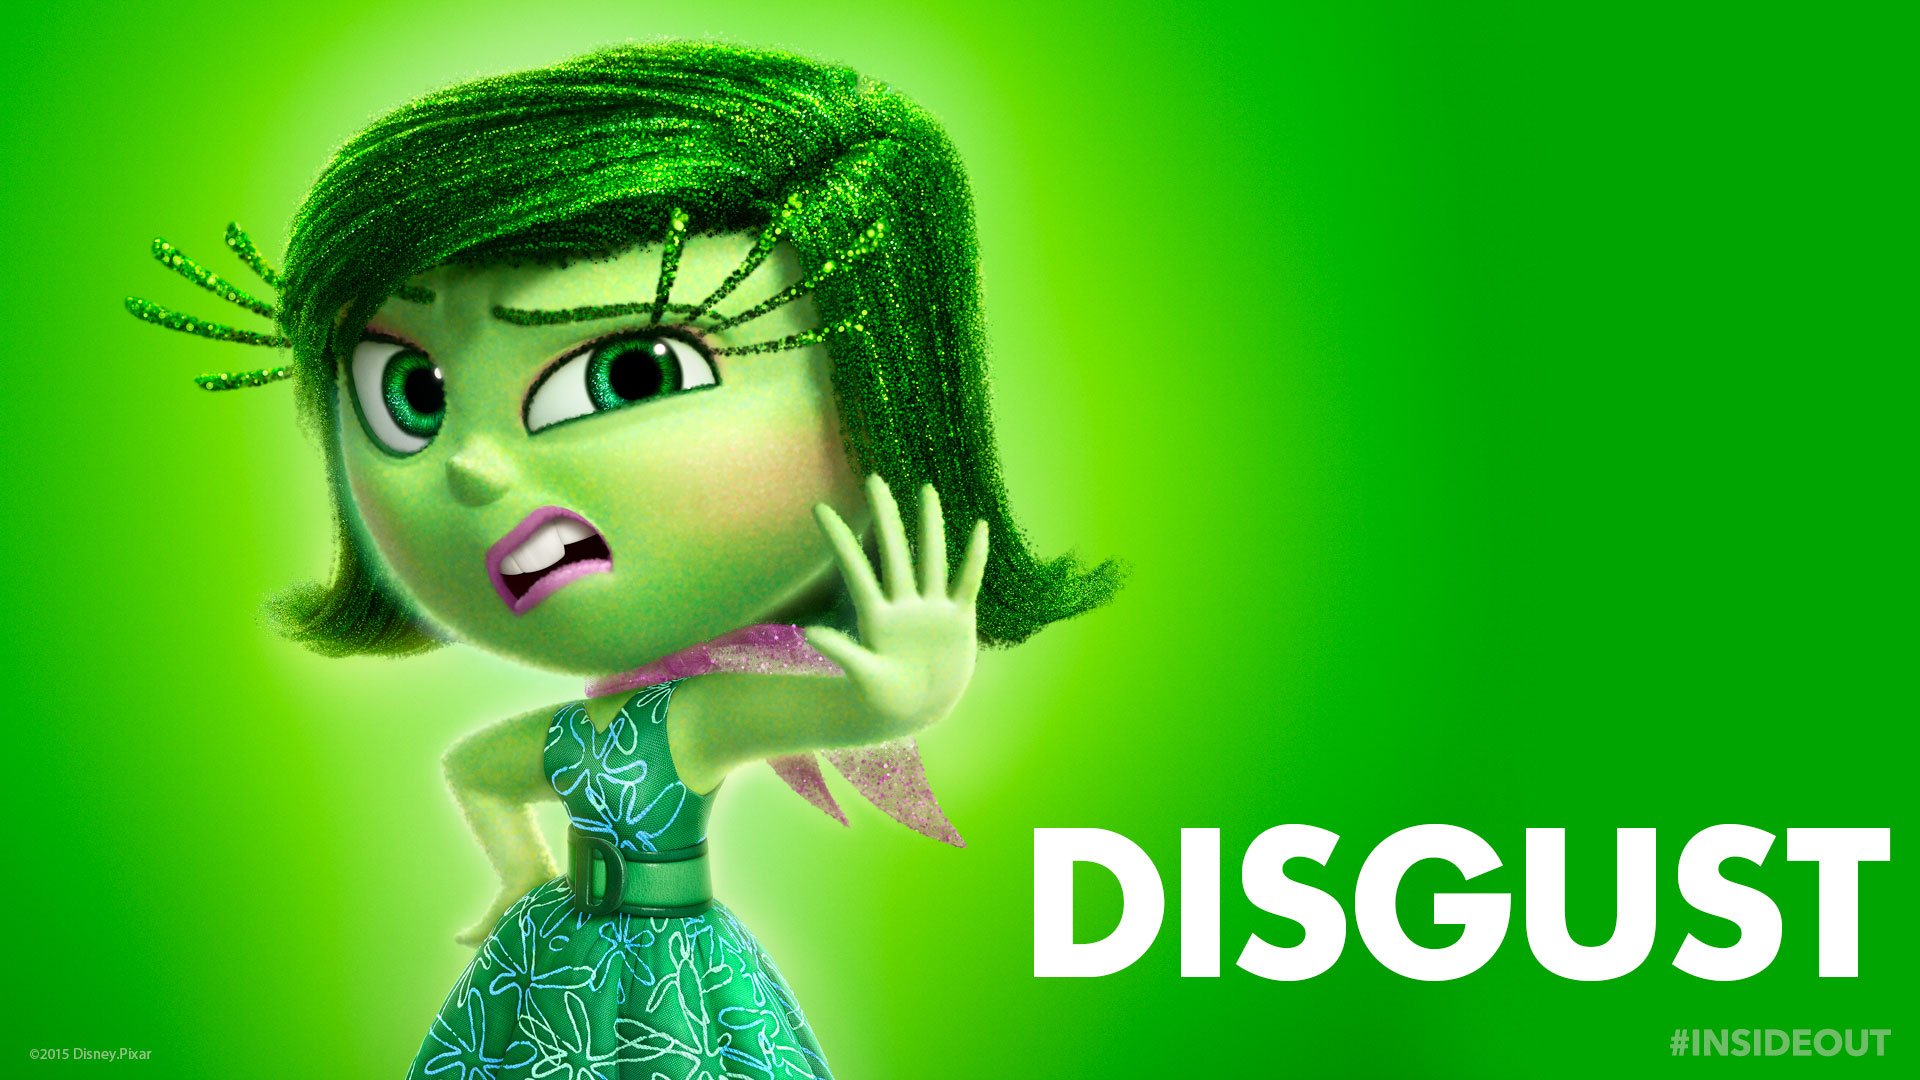 Disney Movie Inside Out 2015 Desktop Backgrounds & iPhone 6 Wallpapers HD